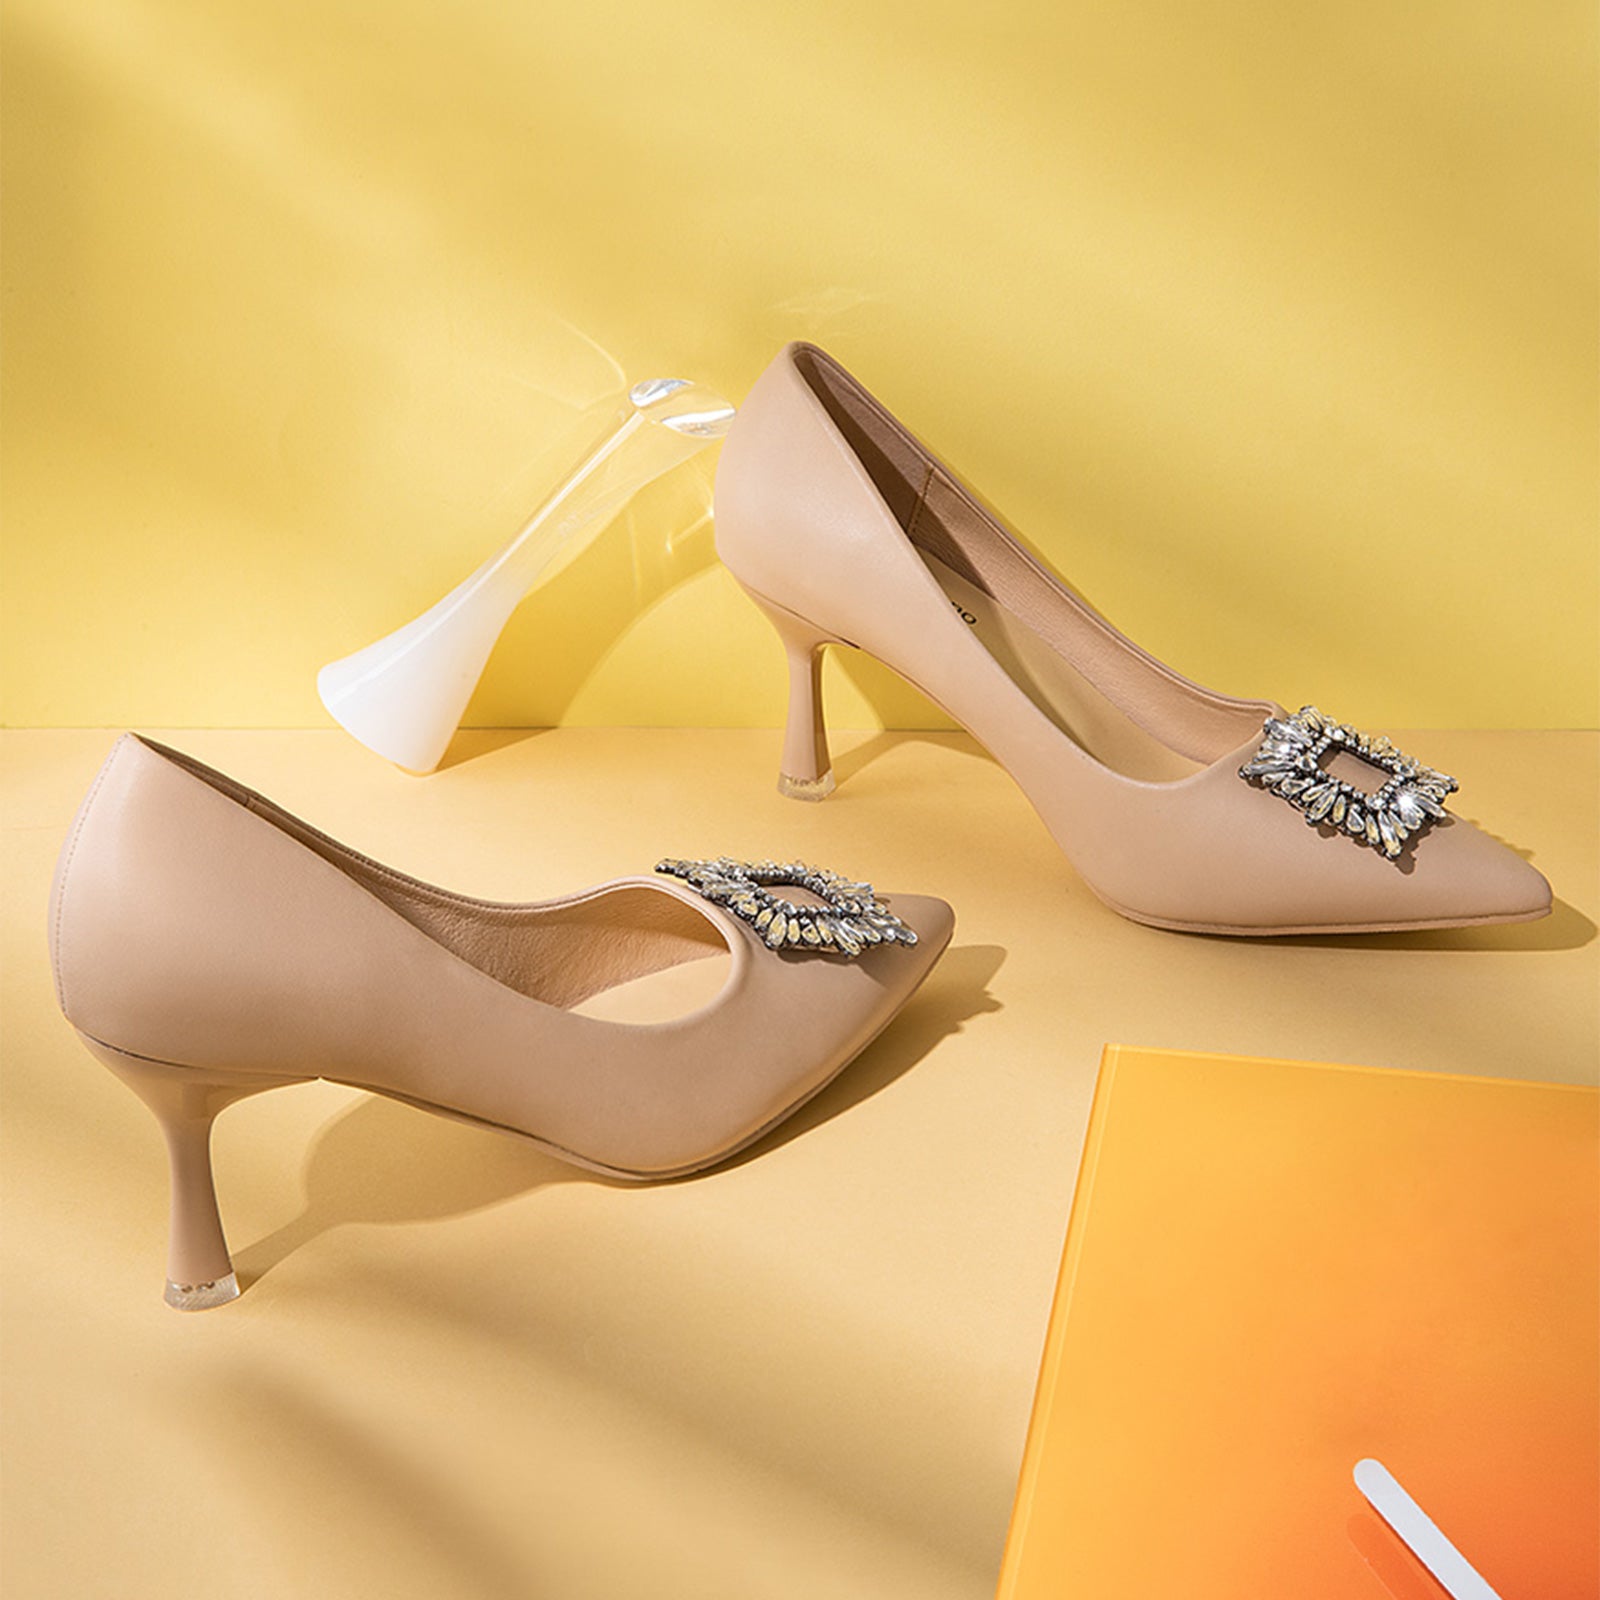 Embrace versatile and stylish flair with these beige leather pumps, featuring a dazzling crystal buckle detail for a polished and fashionable look